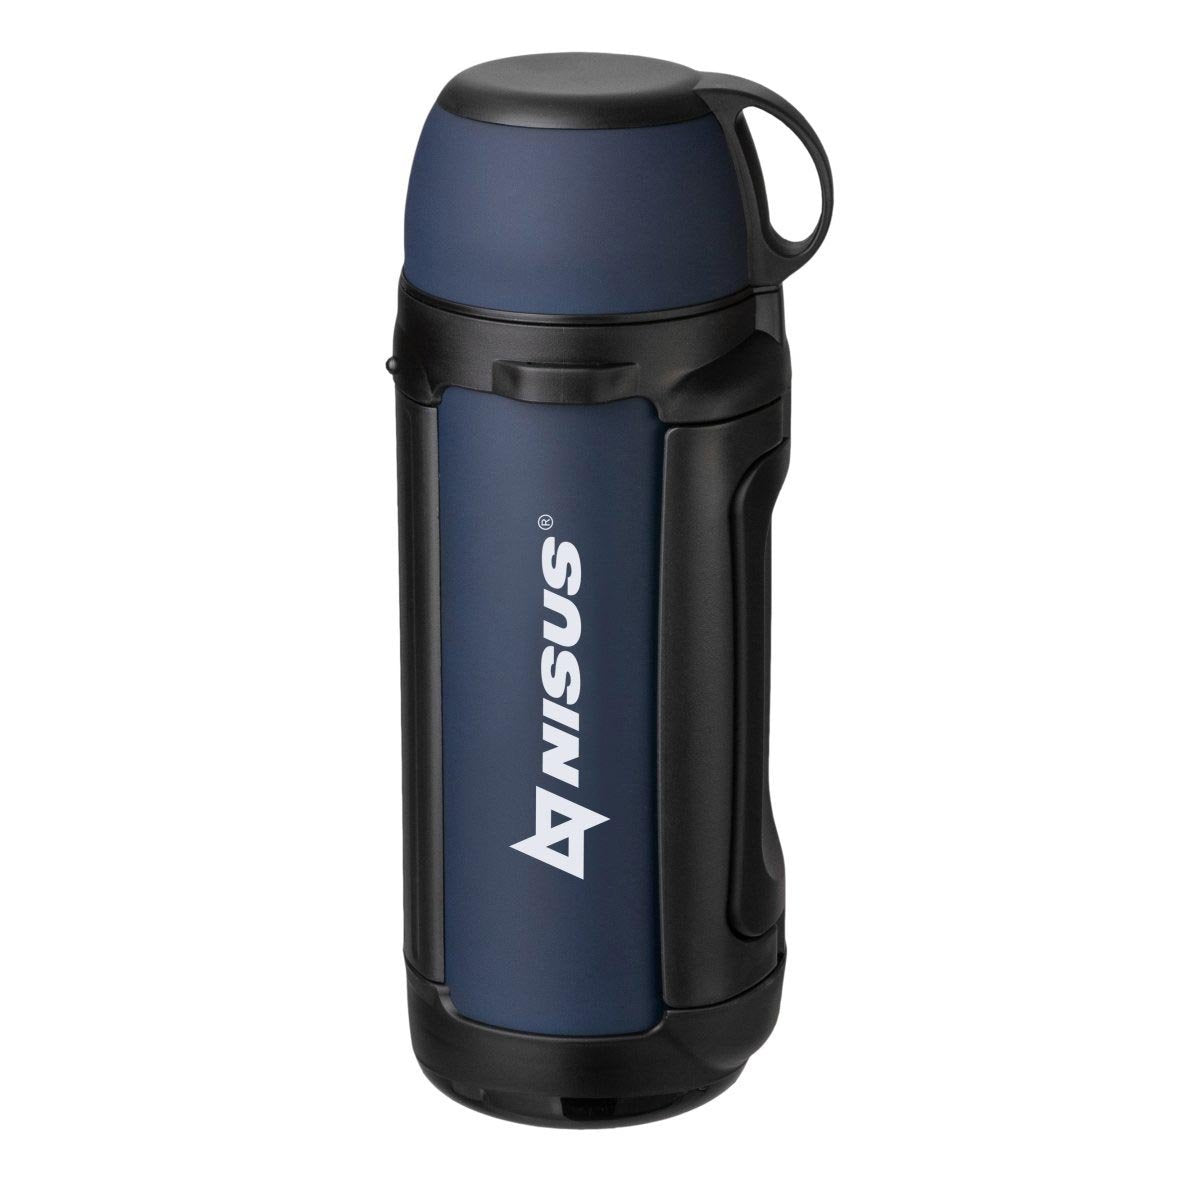 Hot and Cold Stainless Thermos Bottle with Black Handle 64 oz, Triple Wall Vacuum Insulated Stainless Steel